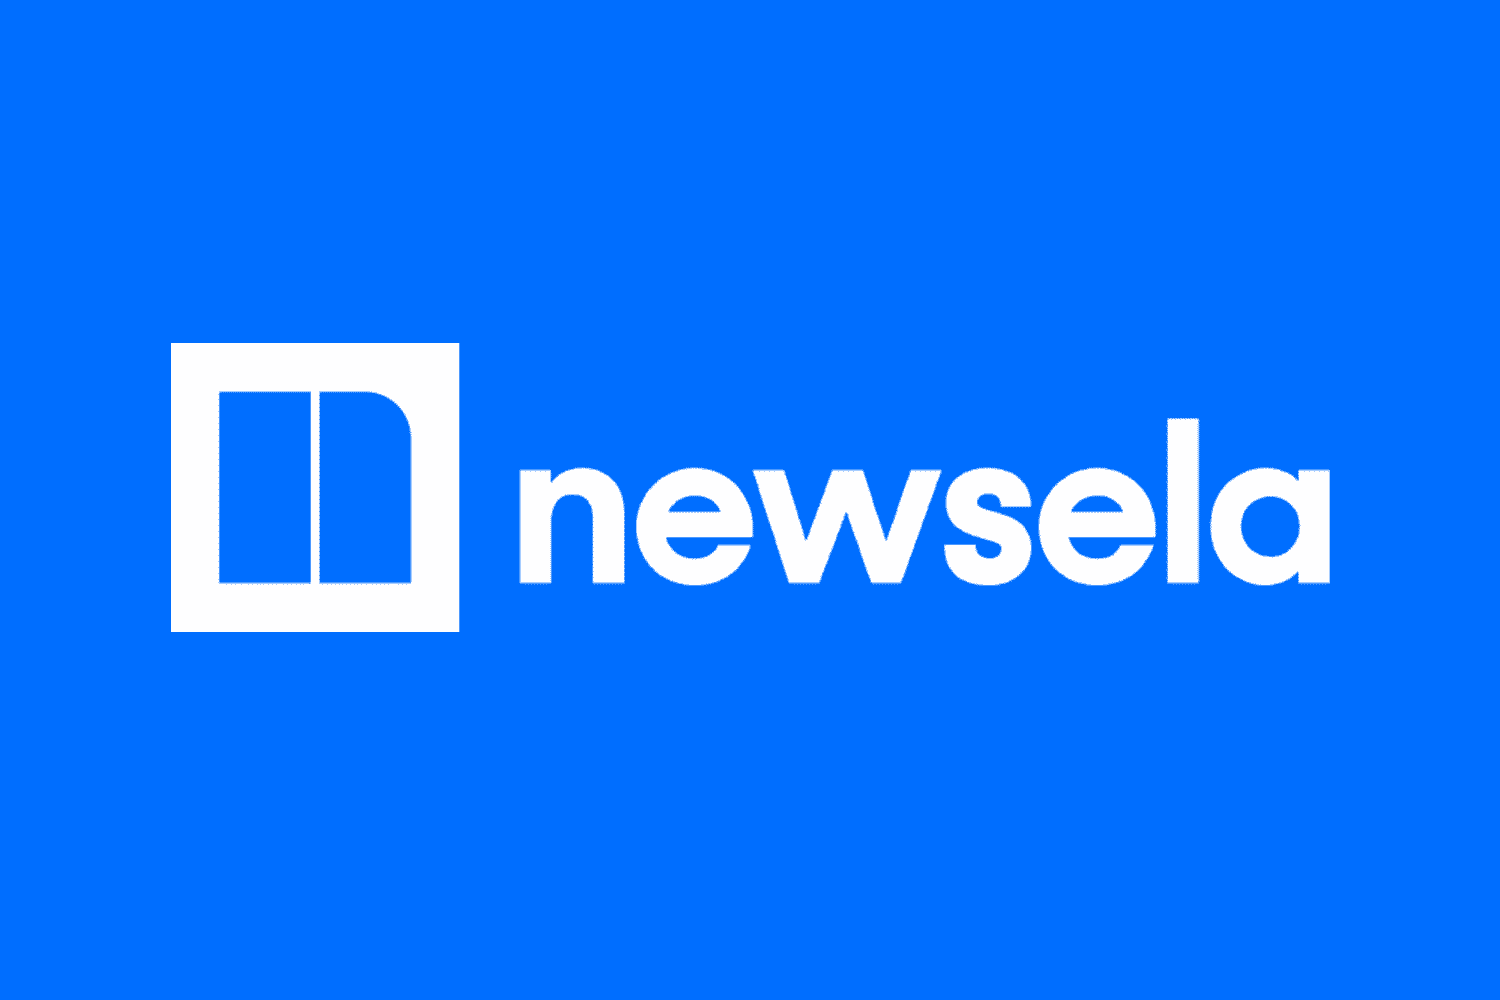 Newsela raises $50M to expand a content repository for K-12 learning that replaces traditional textbooks